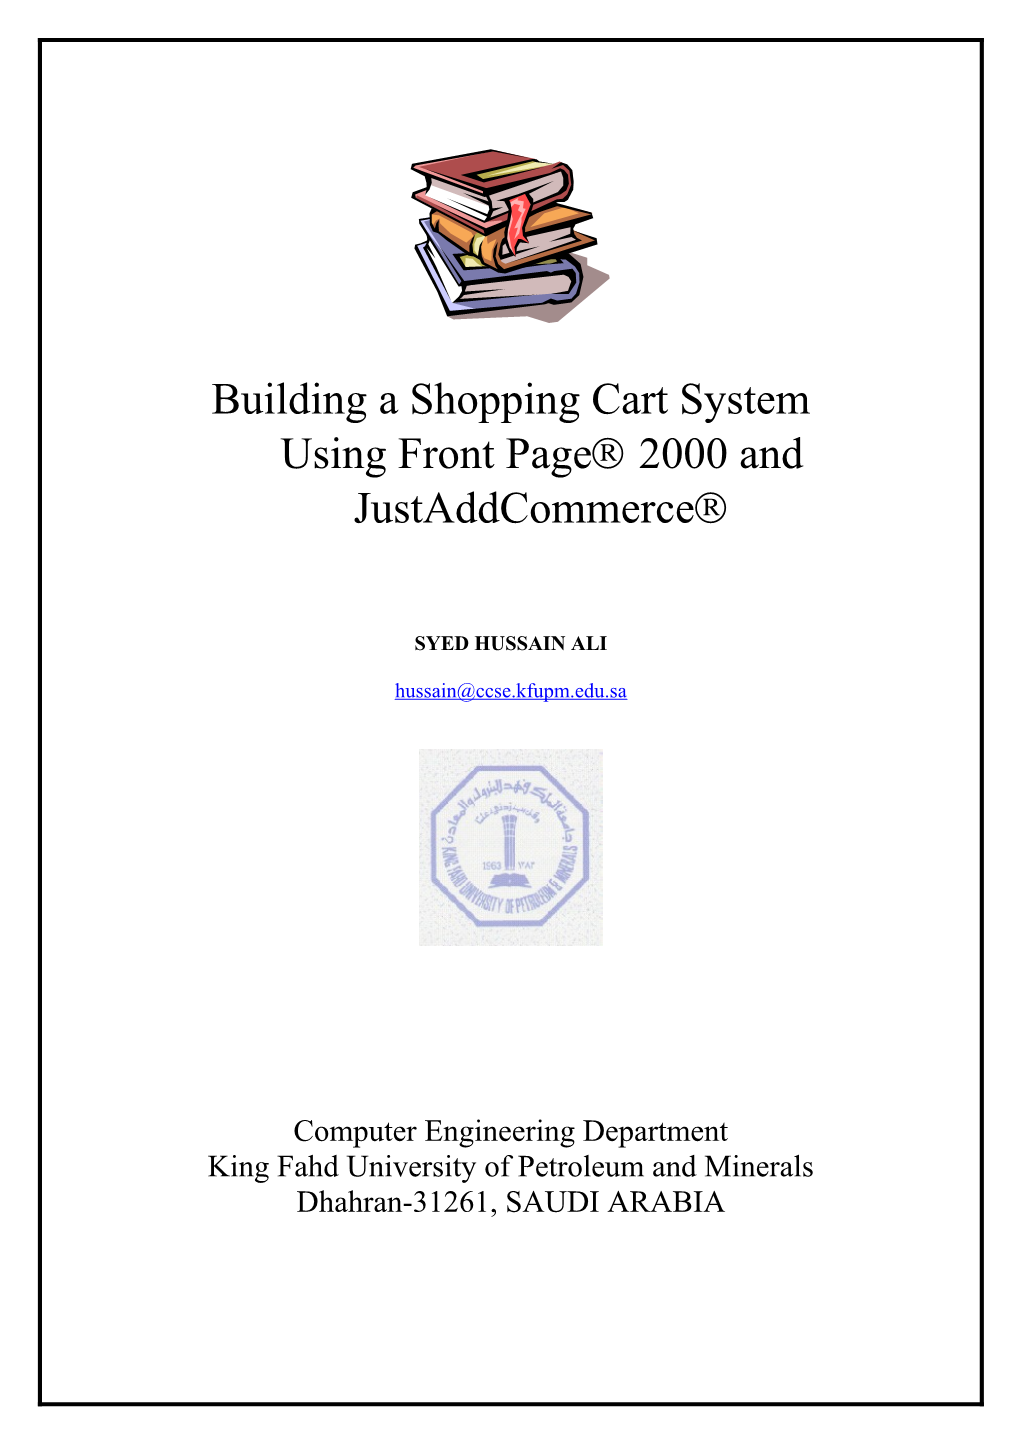 Building a Shopping Cart System Using Justaddcommerce Plugin